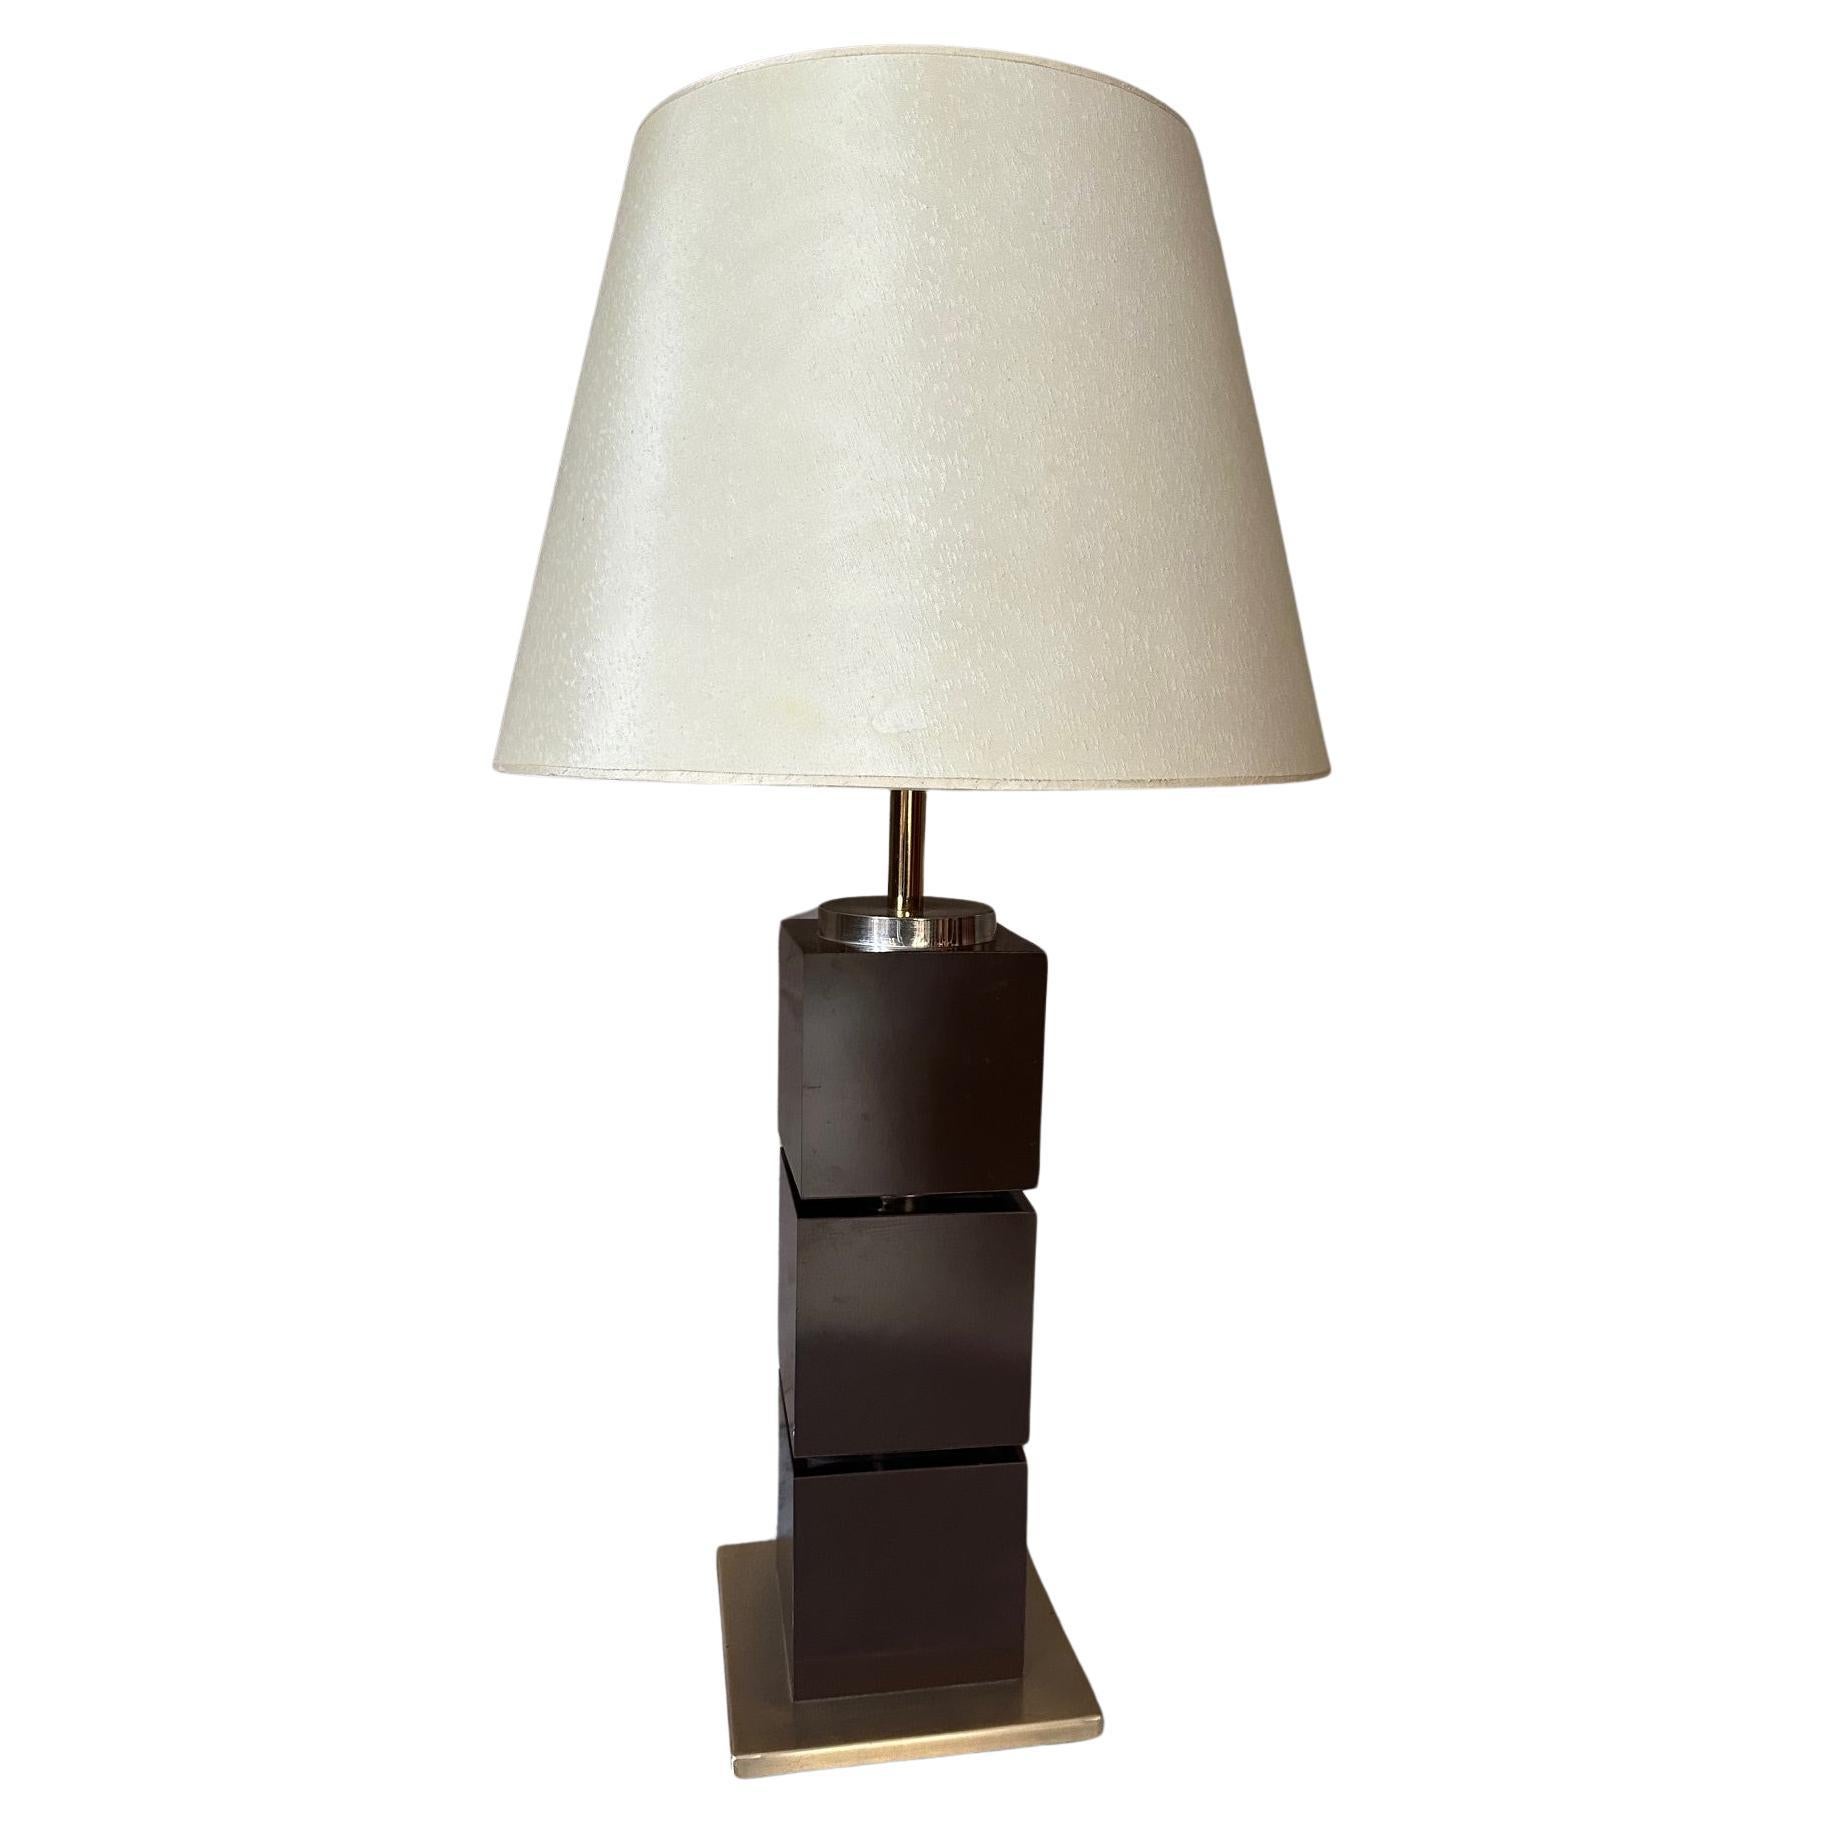 Mid-century French Design Brass and Lacquered Wood Table Lamp For Sale